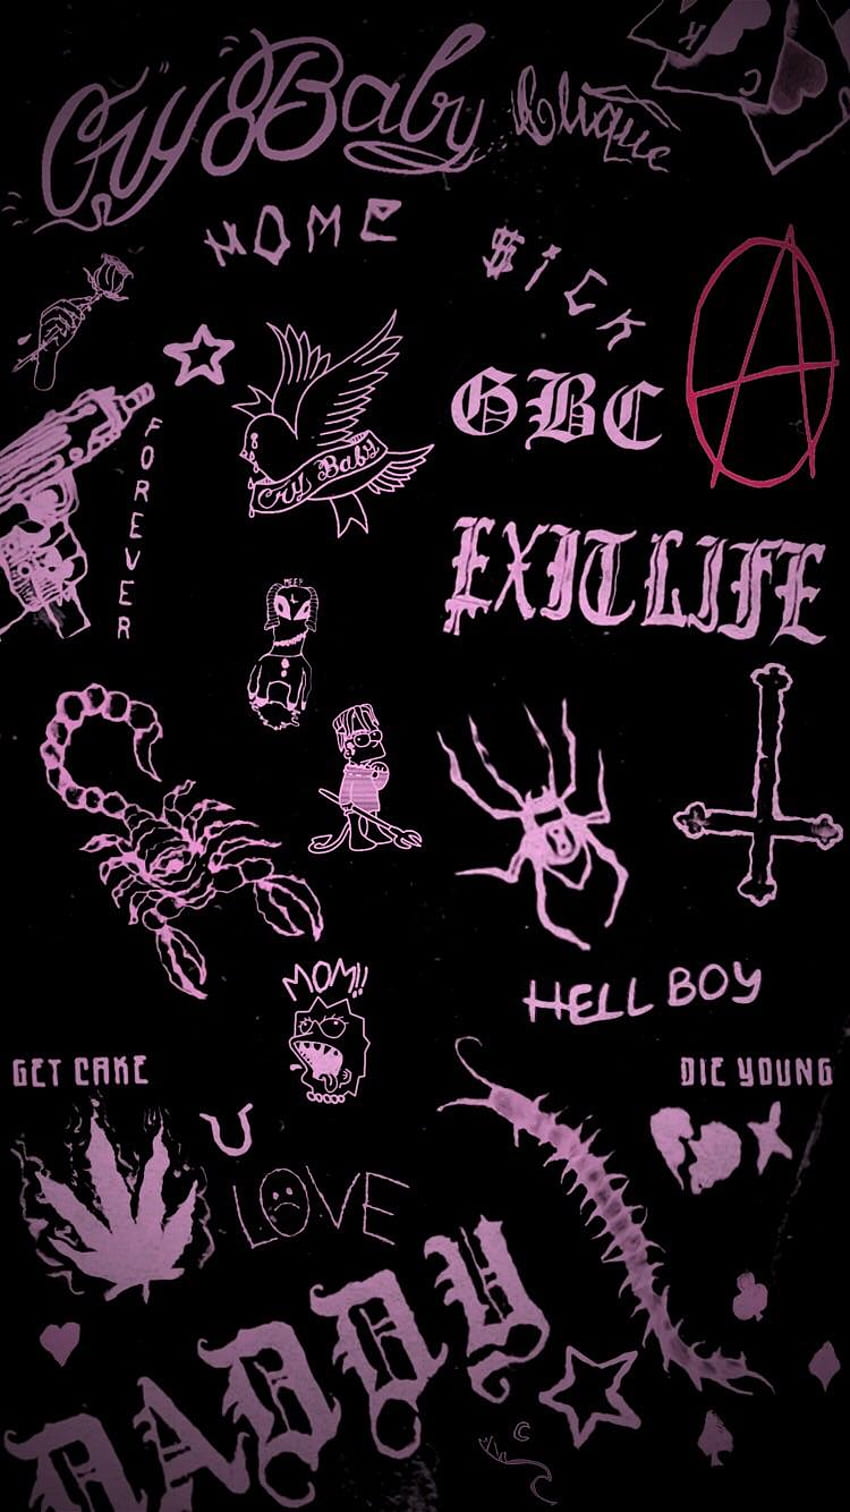 I made, have other color variations & version if any1 wants, Lil Peep ...